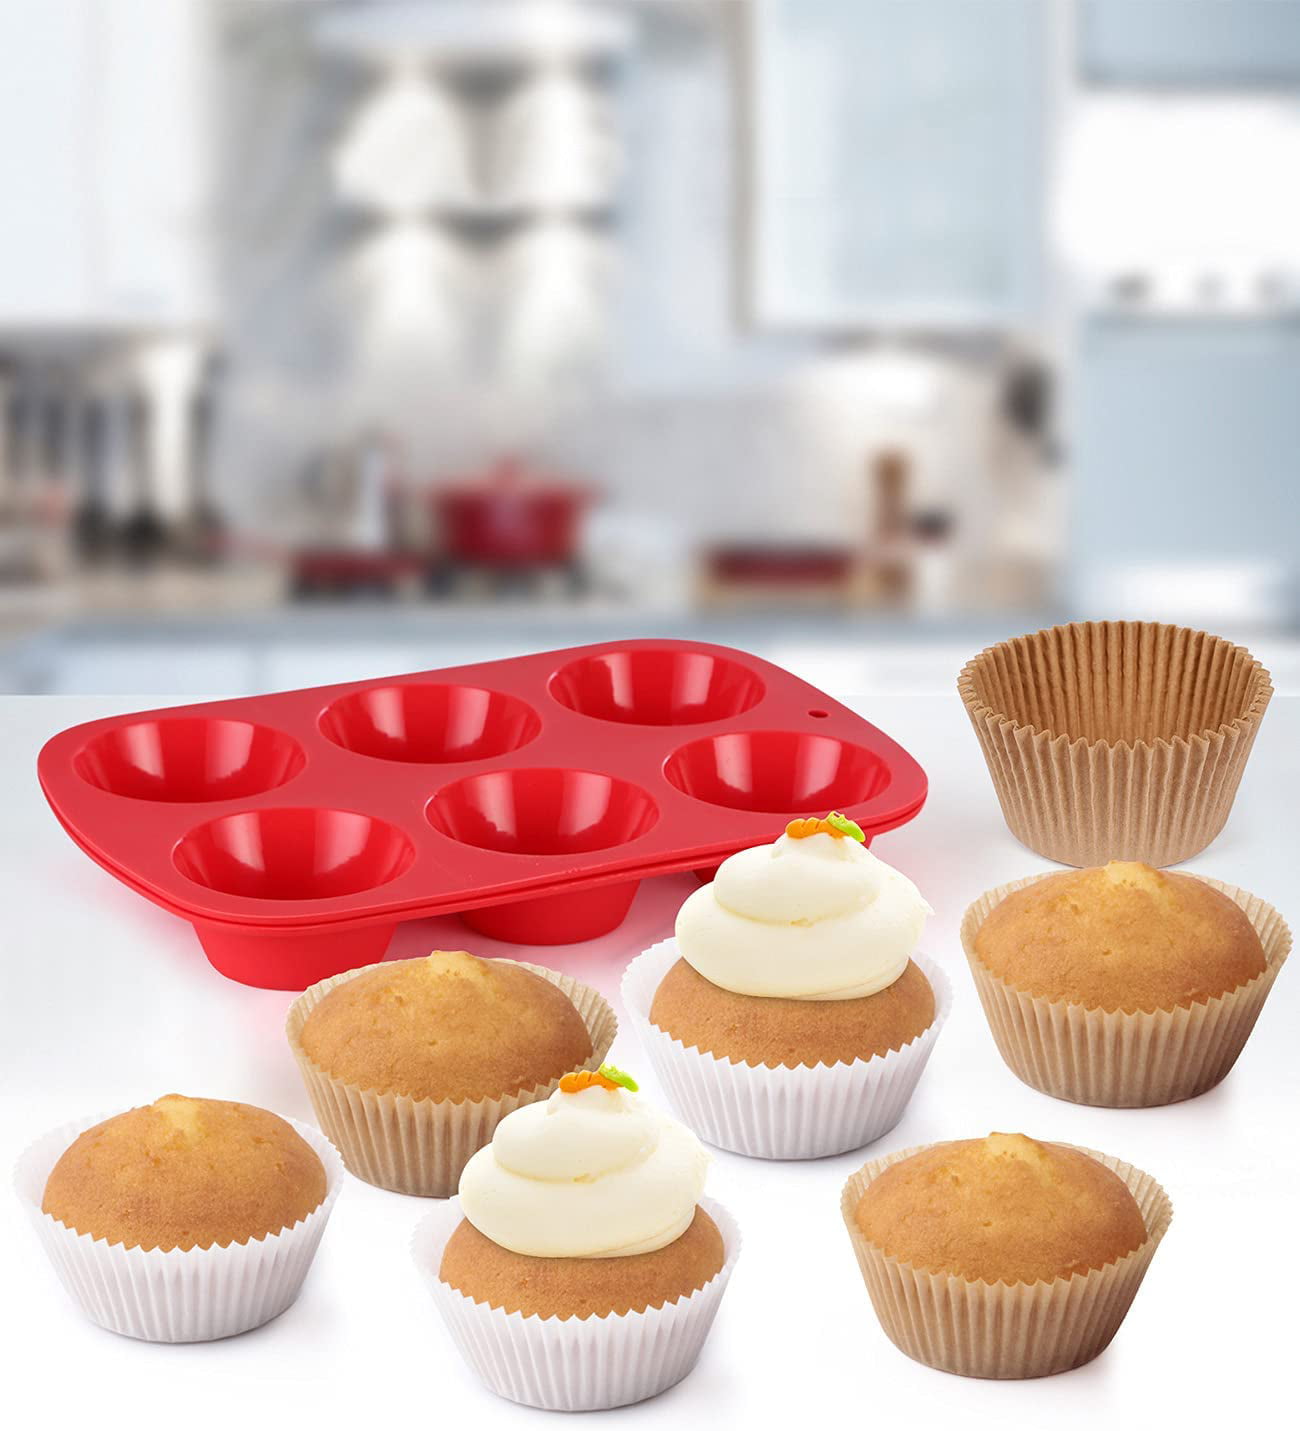 Gifbera Large Jumbo Gold Foil Cupcake Liners 160-Count for Cupcakes